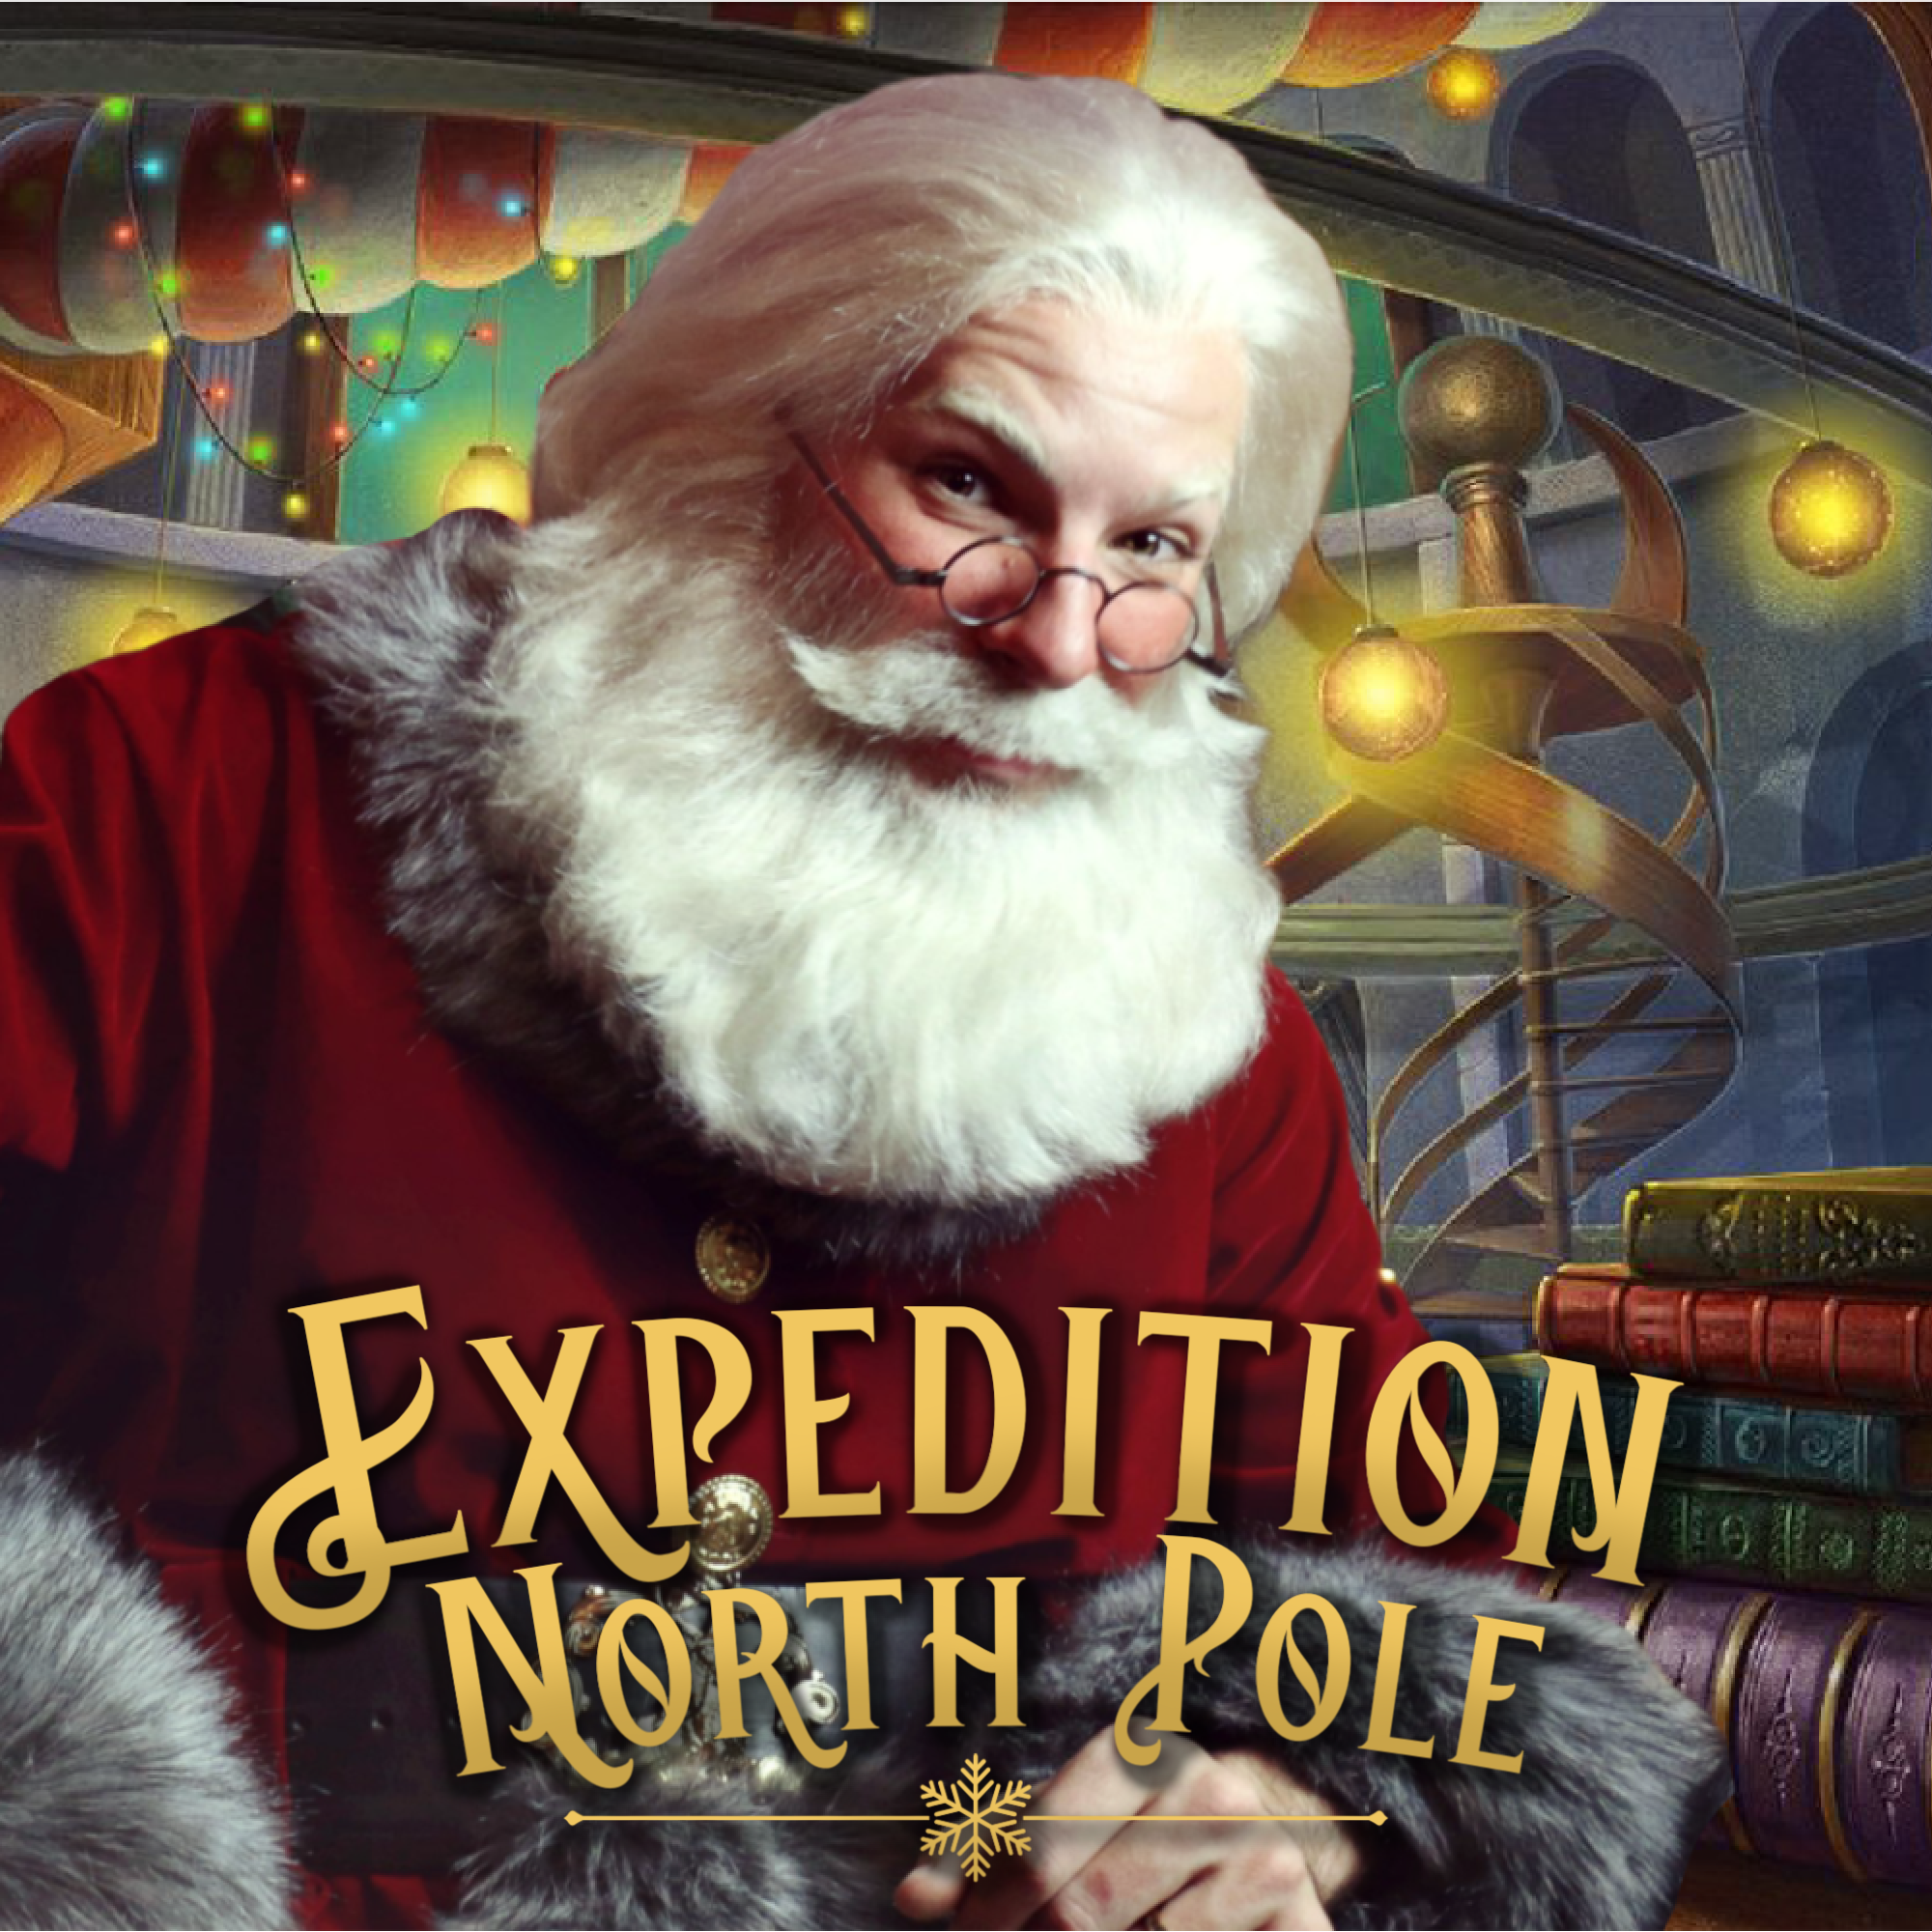 Expedition North Pole